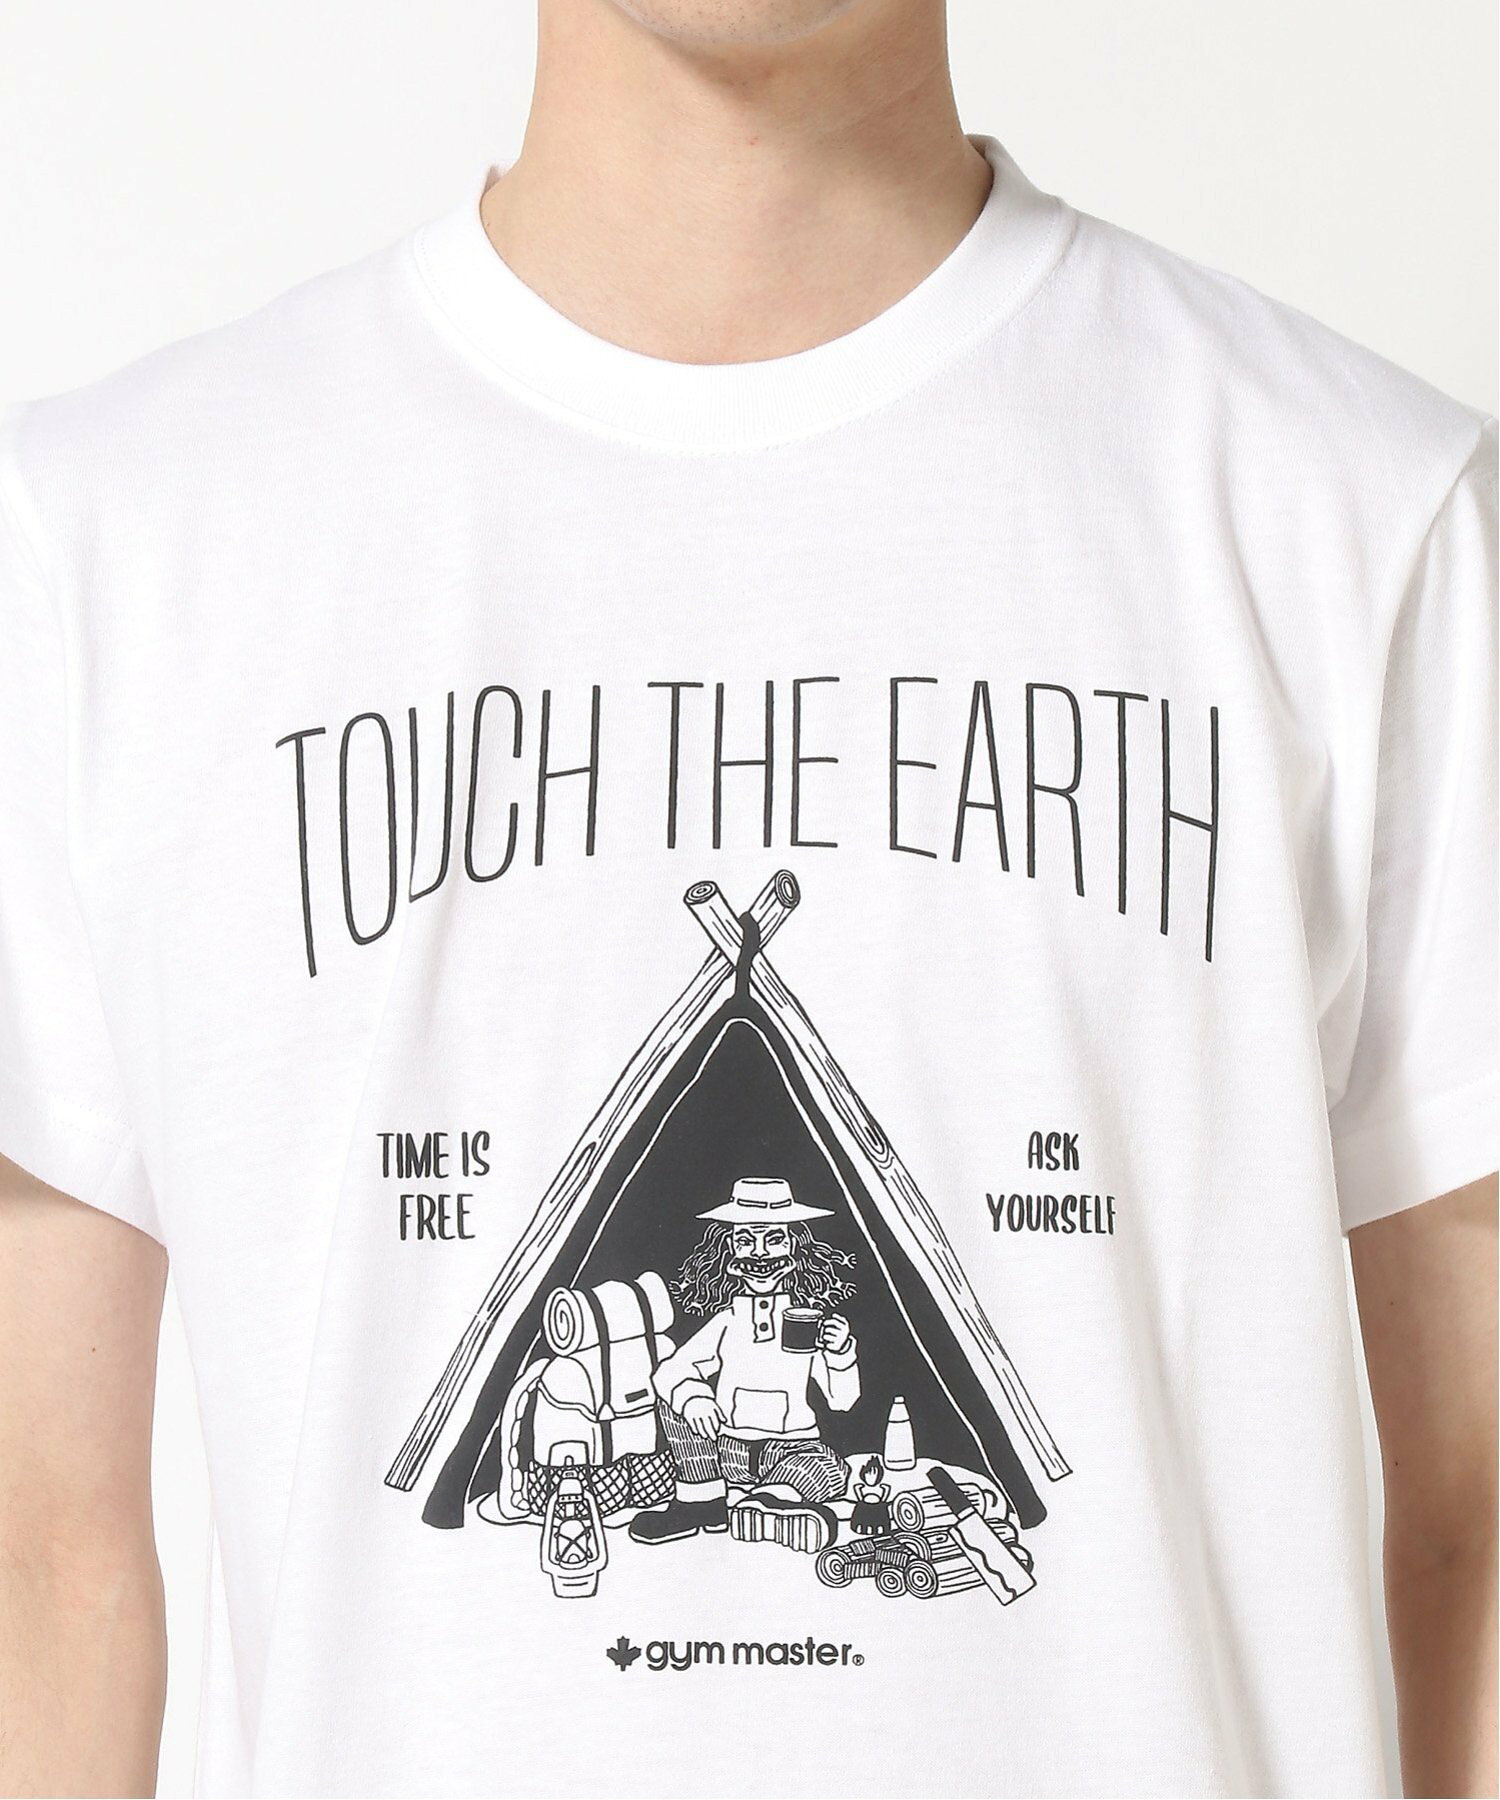 gym master/(U)5.6oz TOUCH THE EARTH Tee